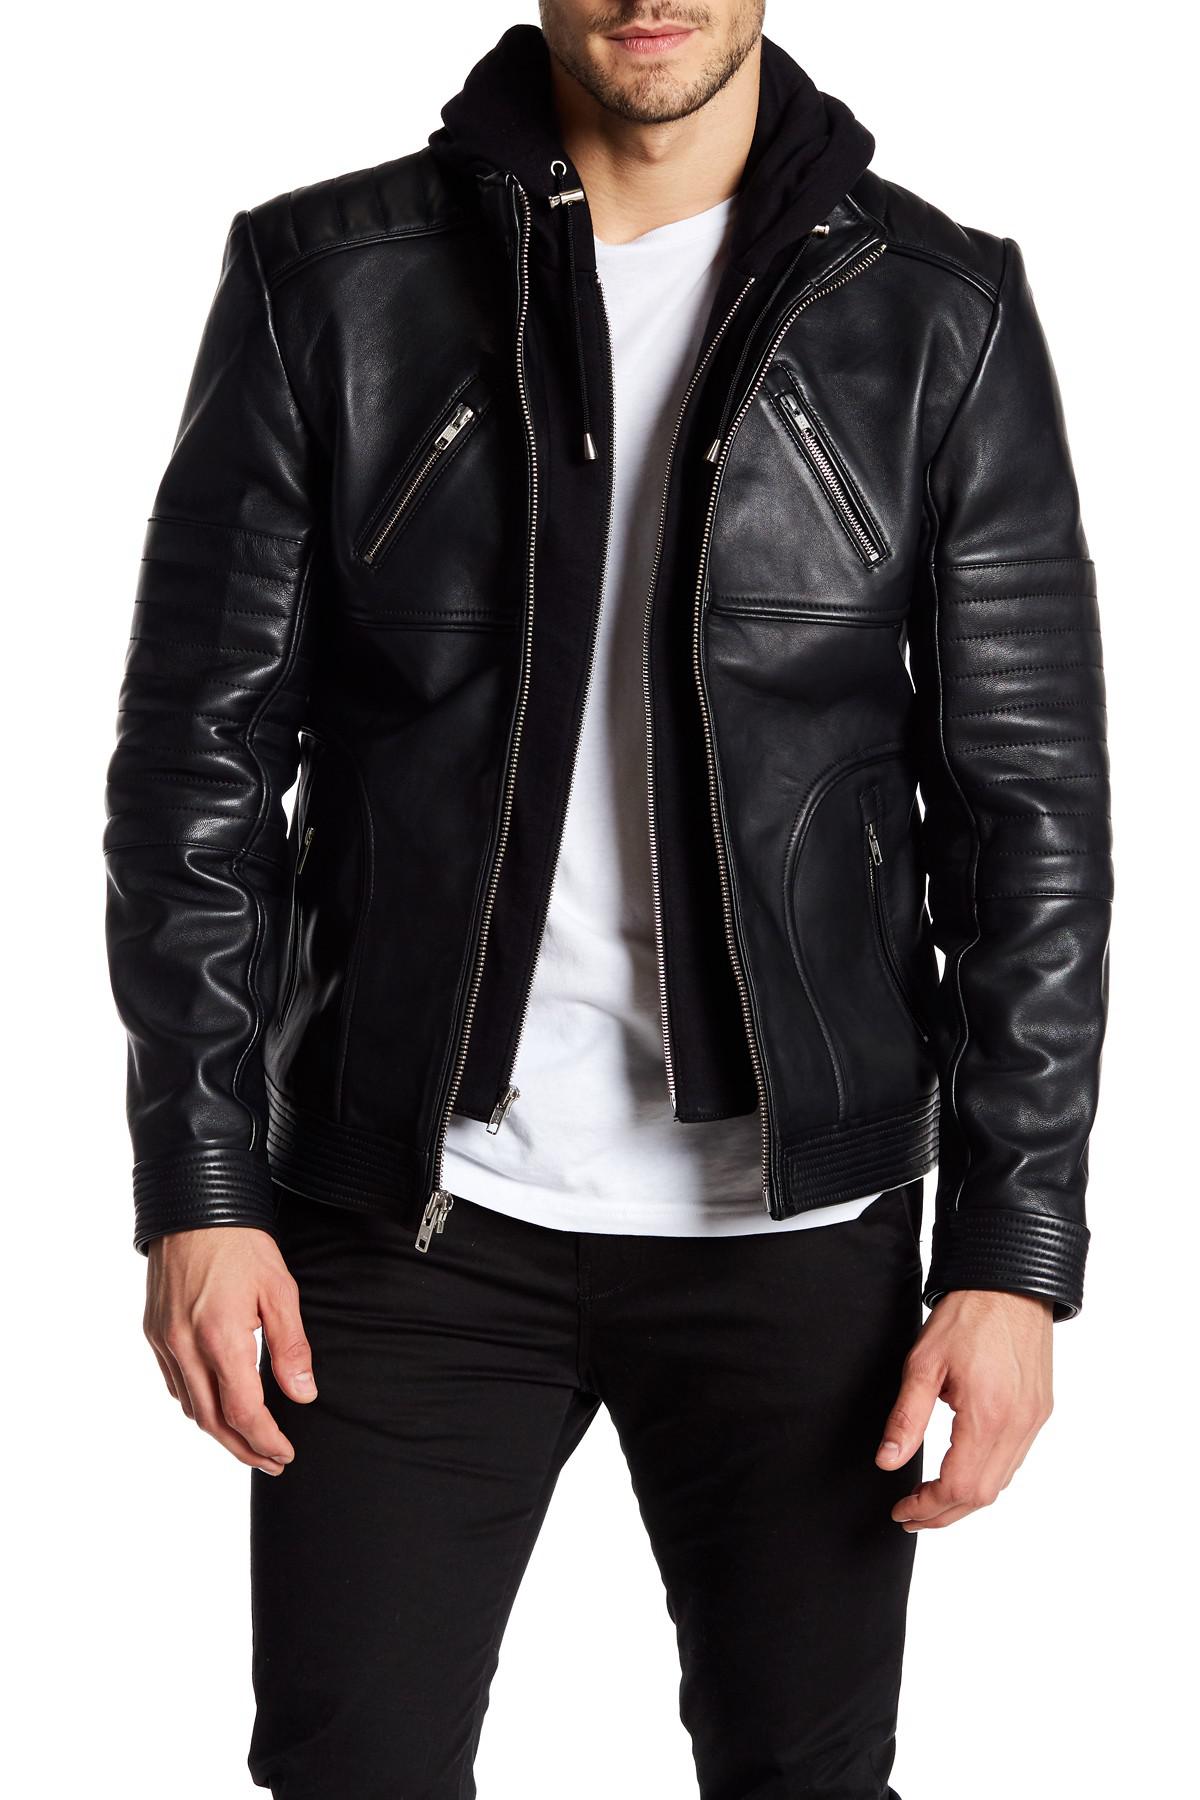 Lamarque Leather Hooded Jacket in Black for Men - Lyst